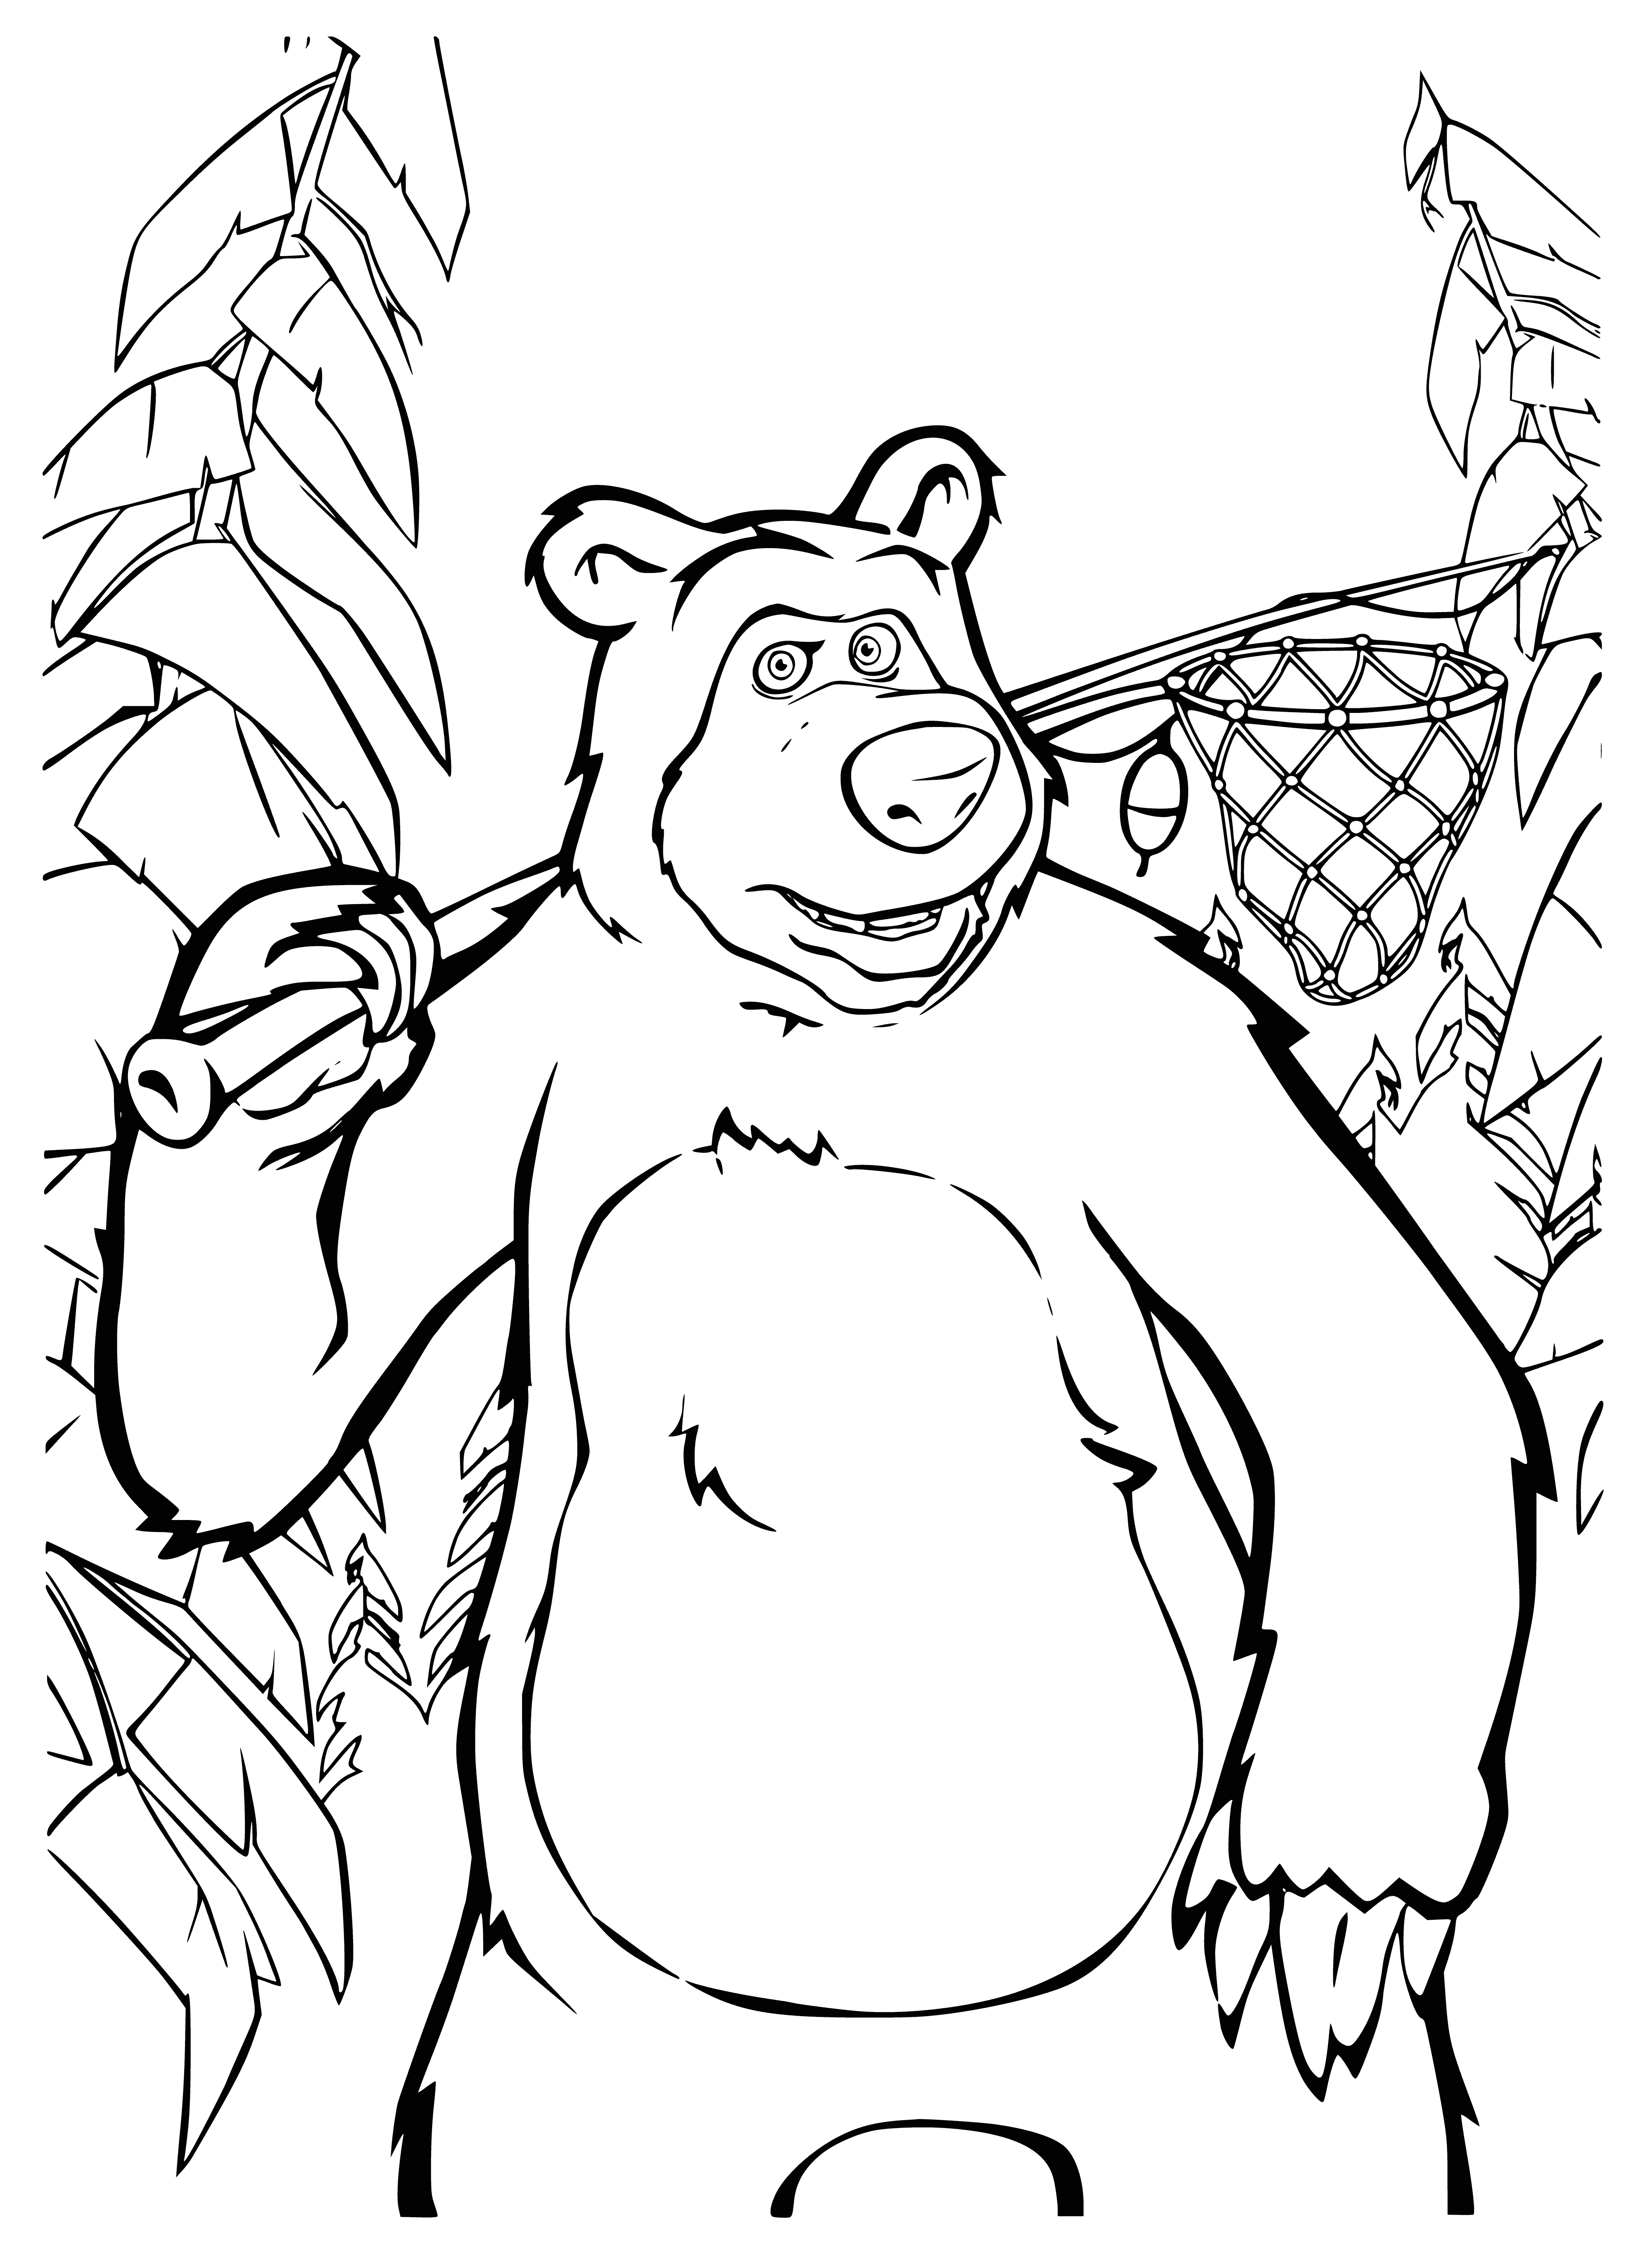 coloring page: Bear sitting alertly, on the lookout for something.